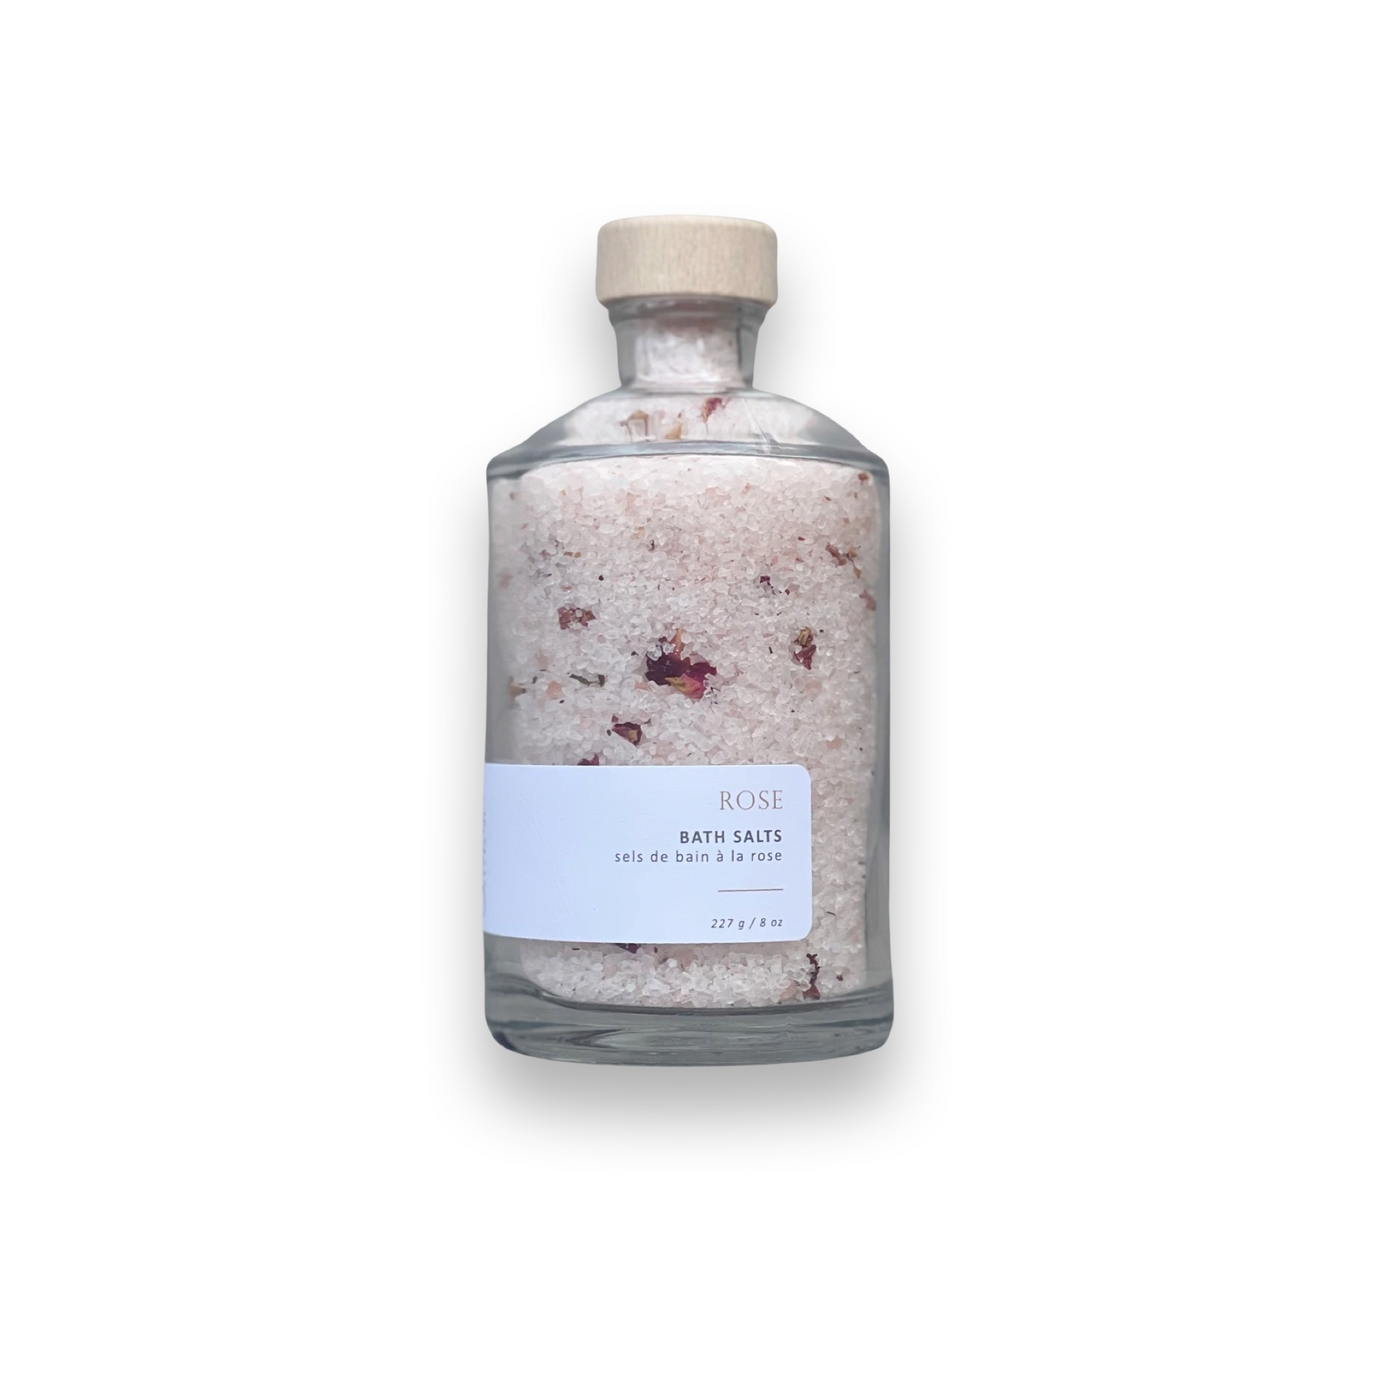 Sealuxe | Rose Bath Salts, The Local Space, Local Canadian Brands